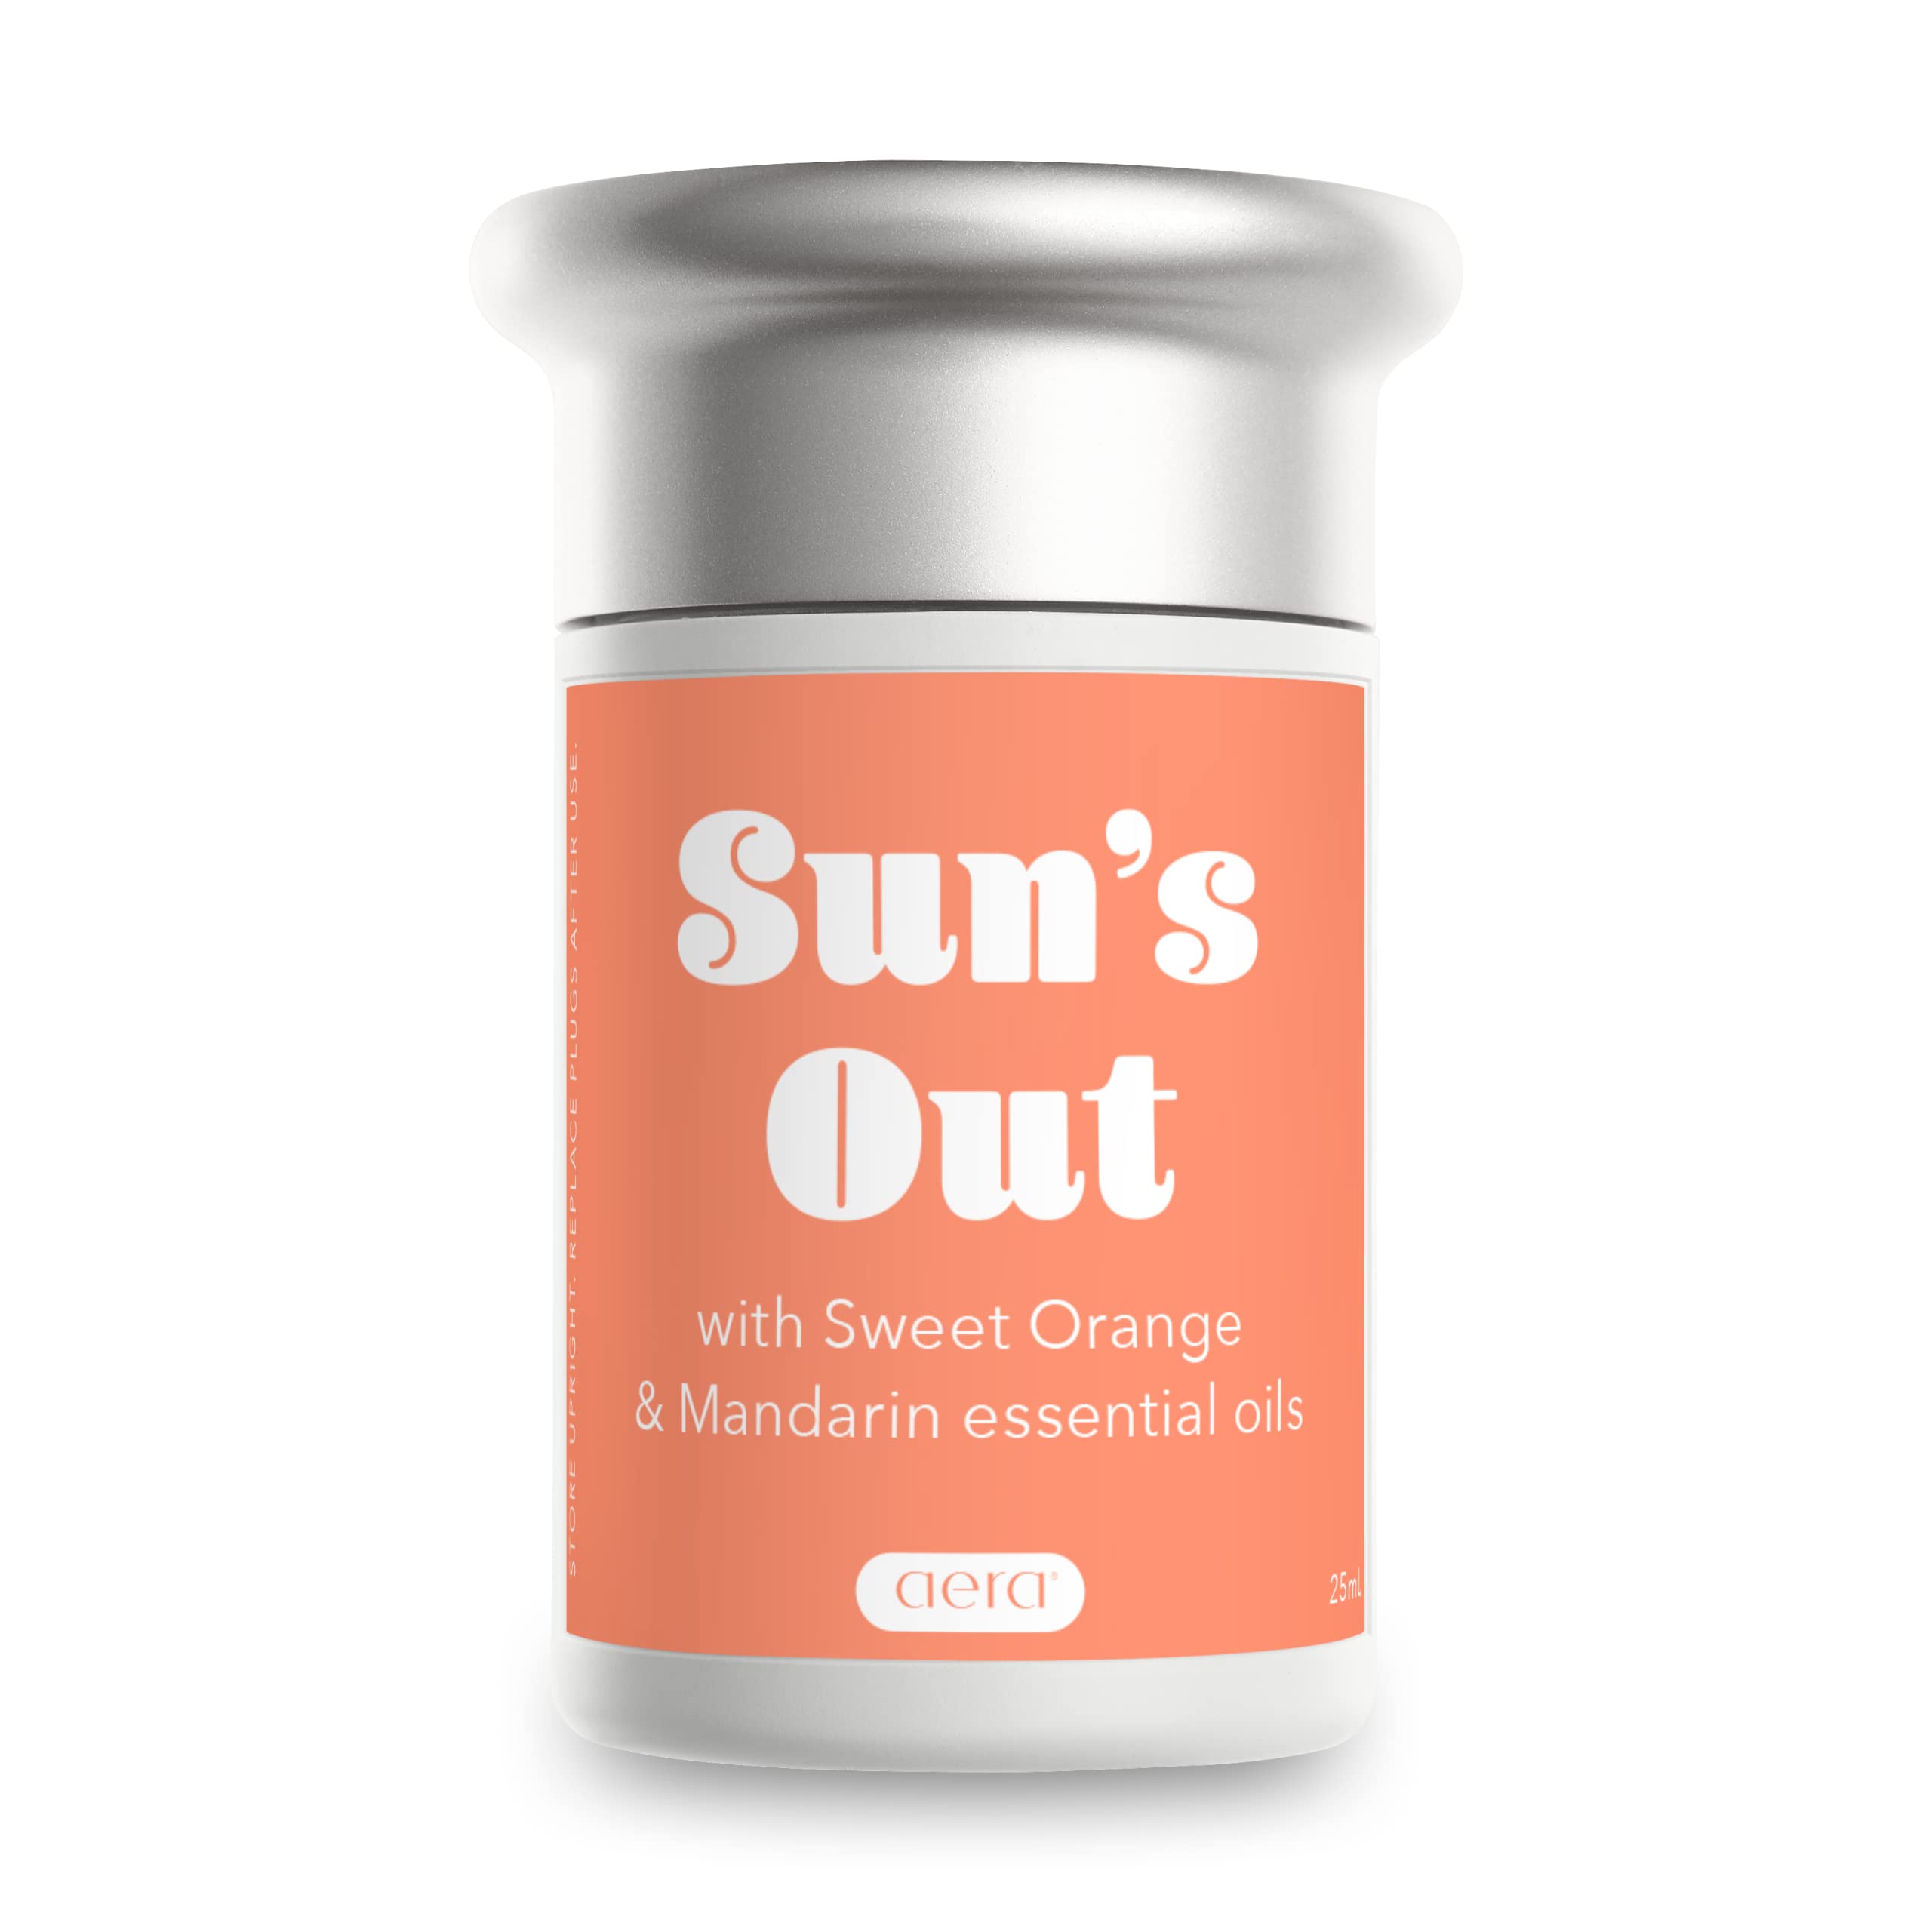 Aera Suns Out Home Fragrance Scent Refill - Notes of Sweet Orange and Mandarin - Works with The Aera Diffuser